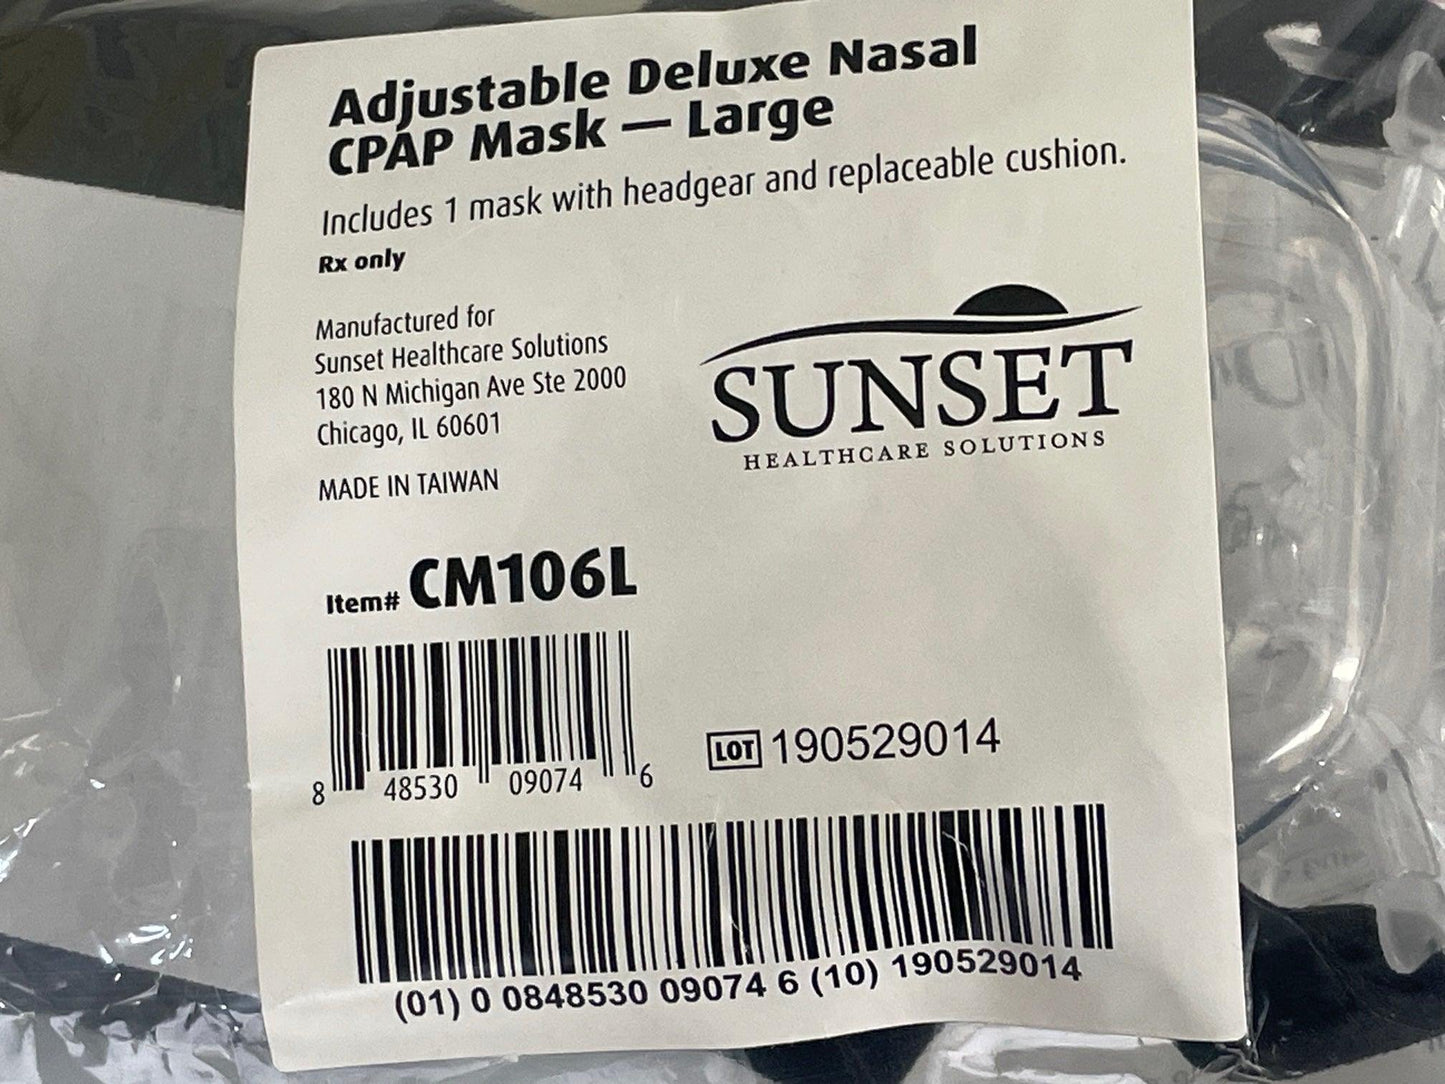 NEW Large Sunset Healthcare Adjustable Deluxe Nasal CPAP Mask with Headgear CM106L - MBR Medicals